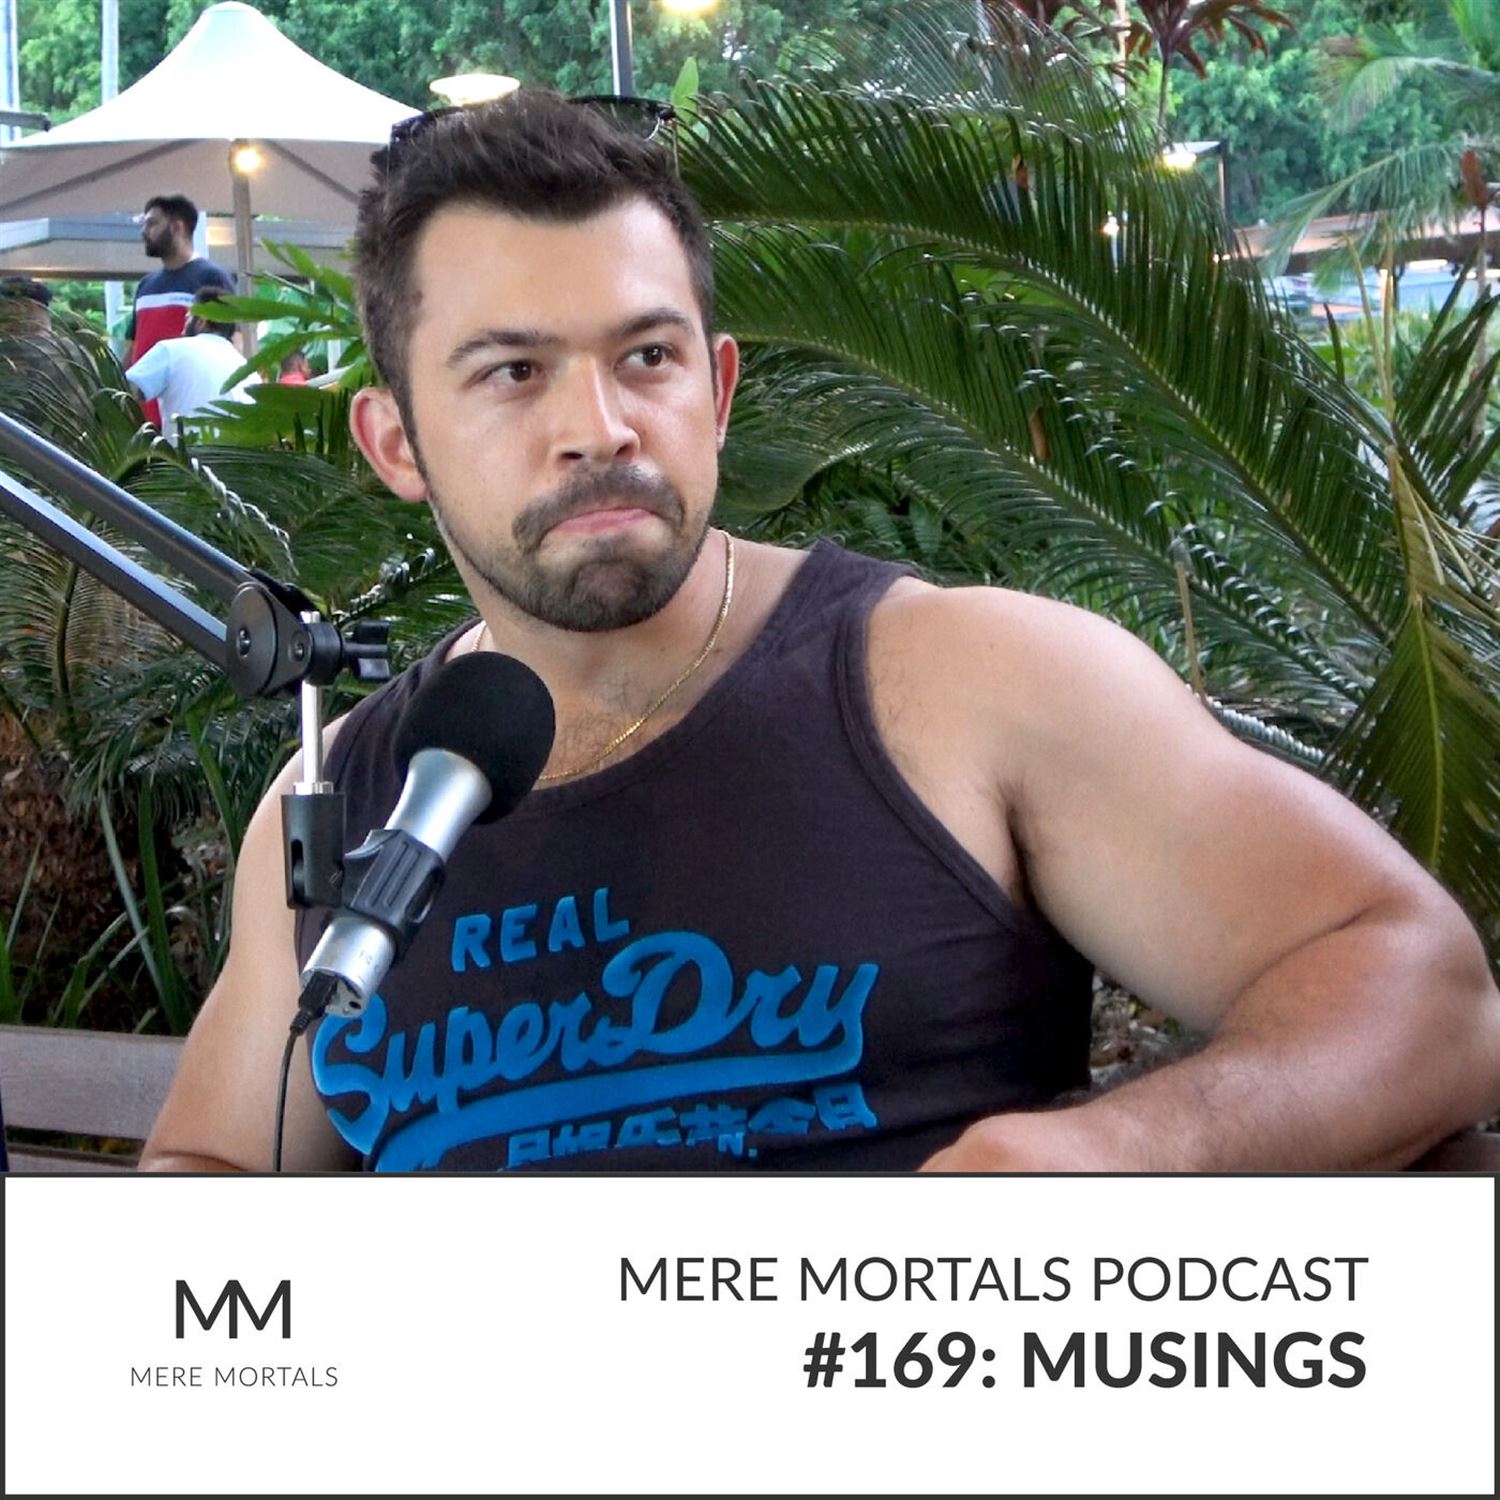 A Week Of Being Humbled (Episode #169 - Musings)